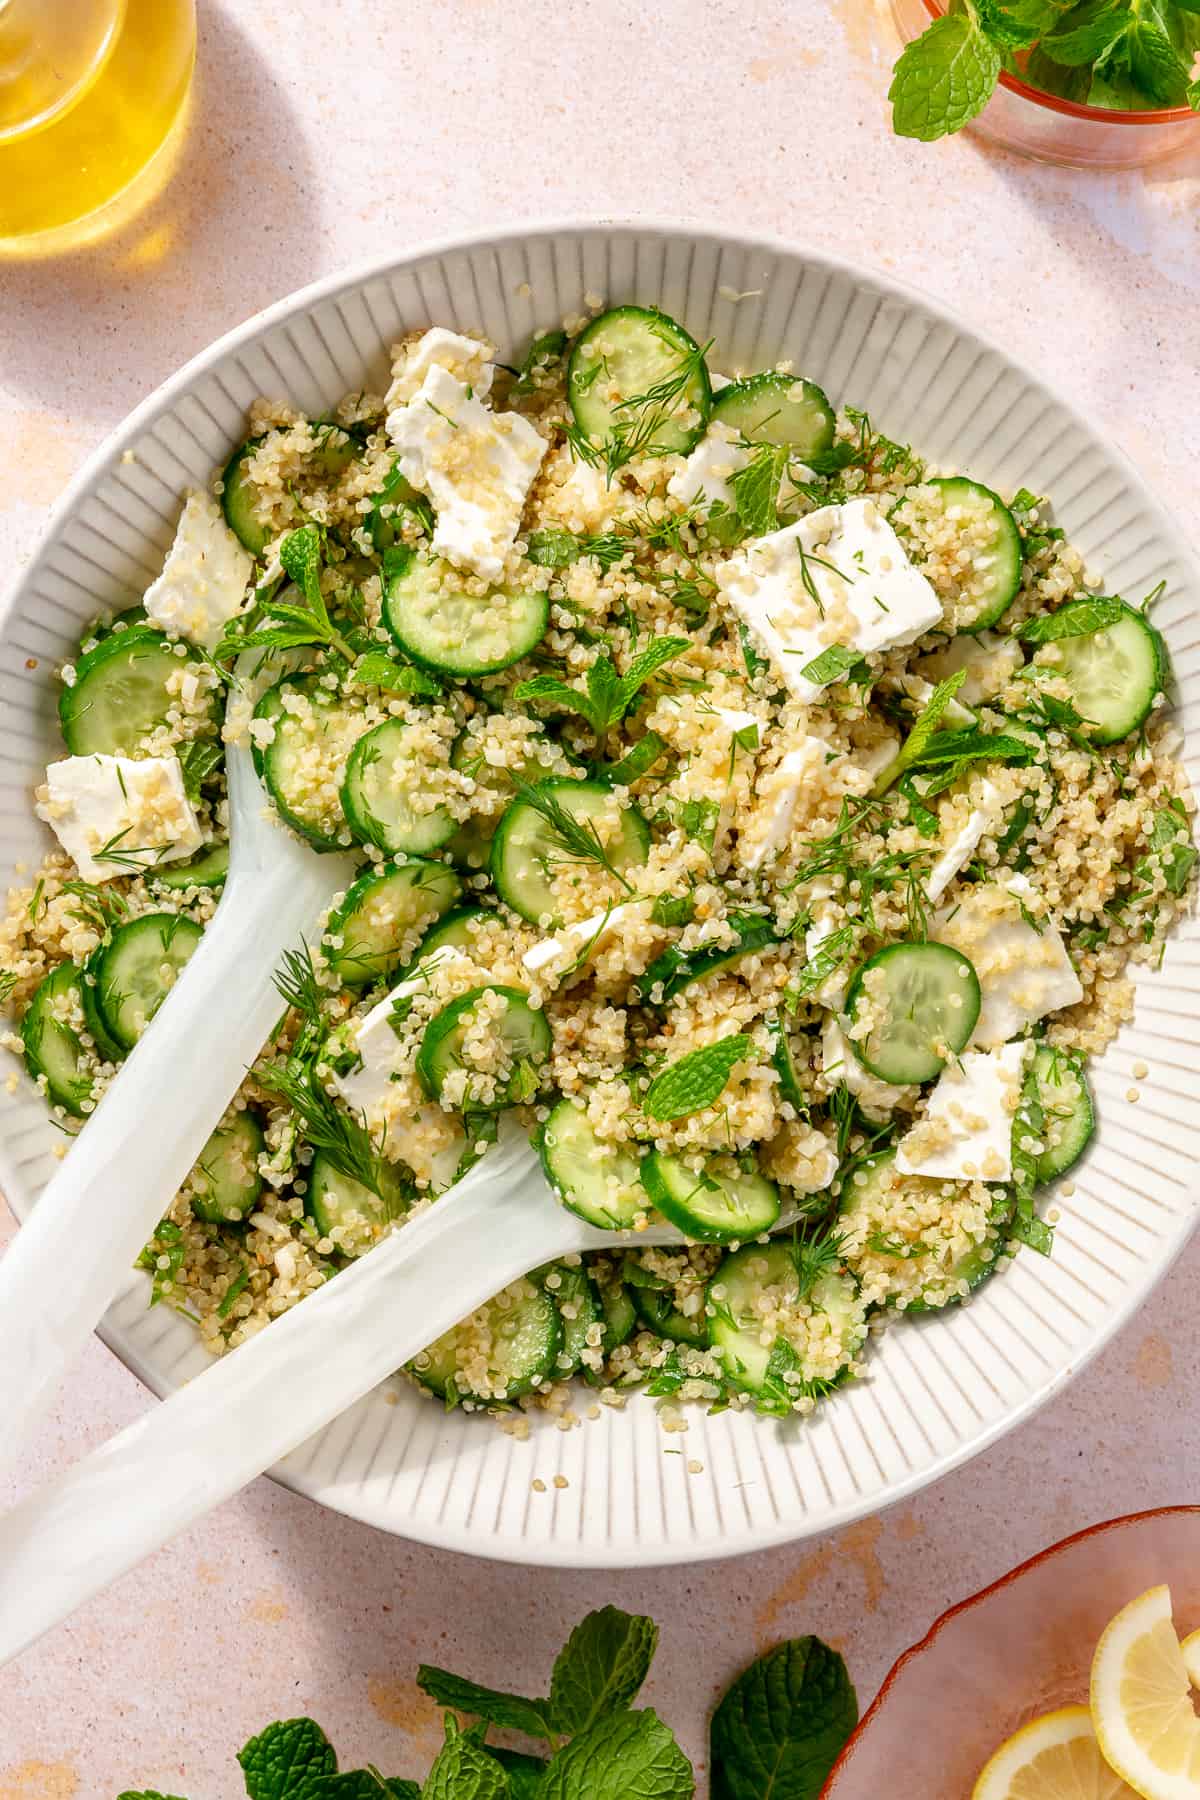 Quinoa salad tossed with all ingredients in large bowl.